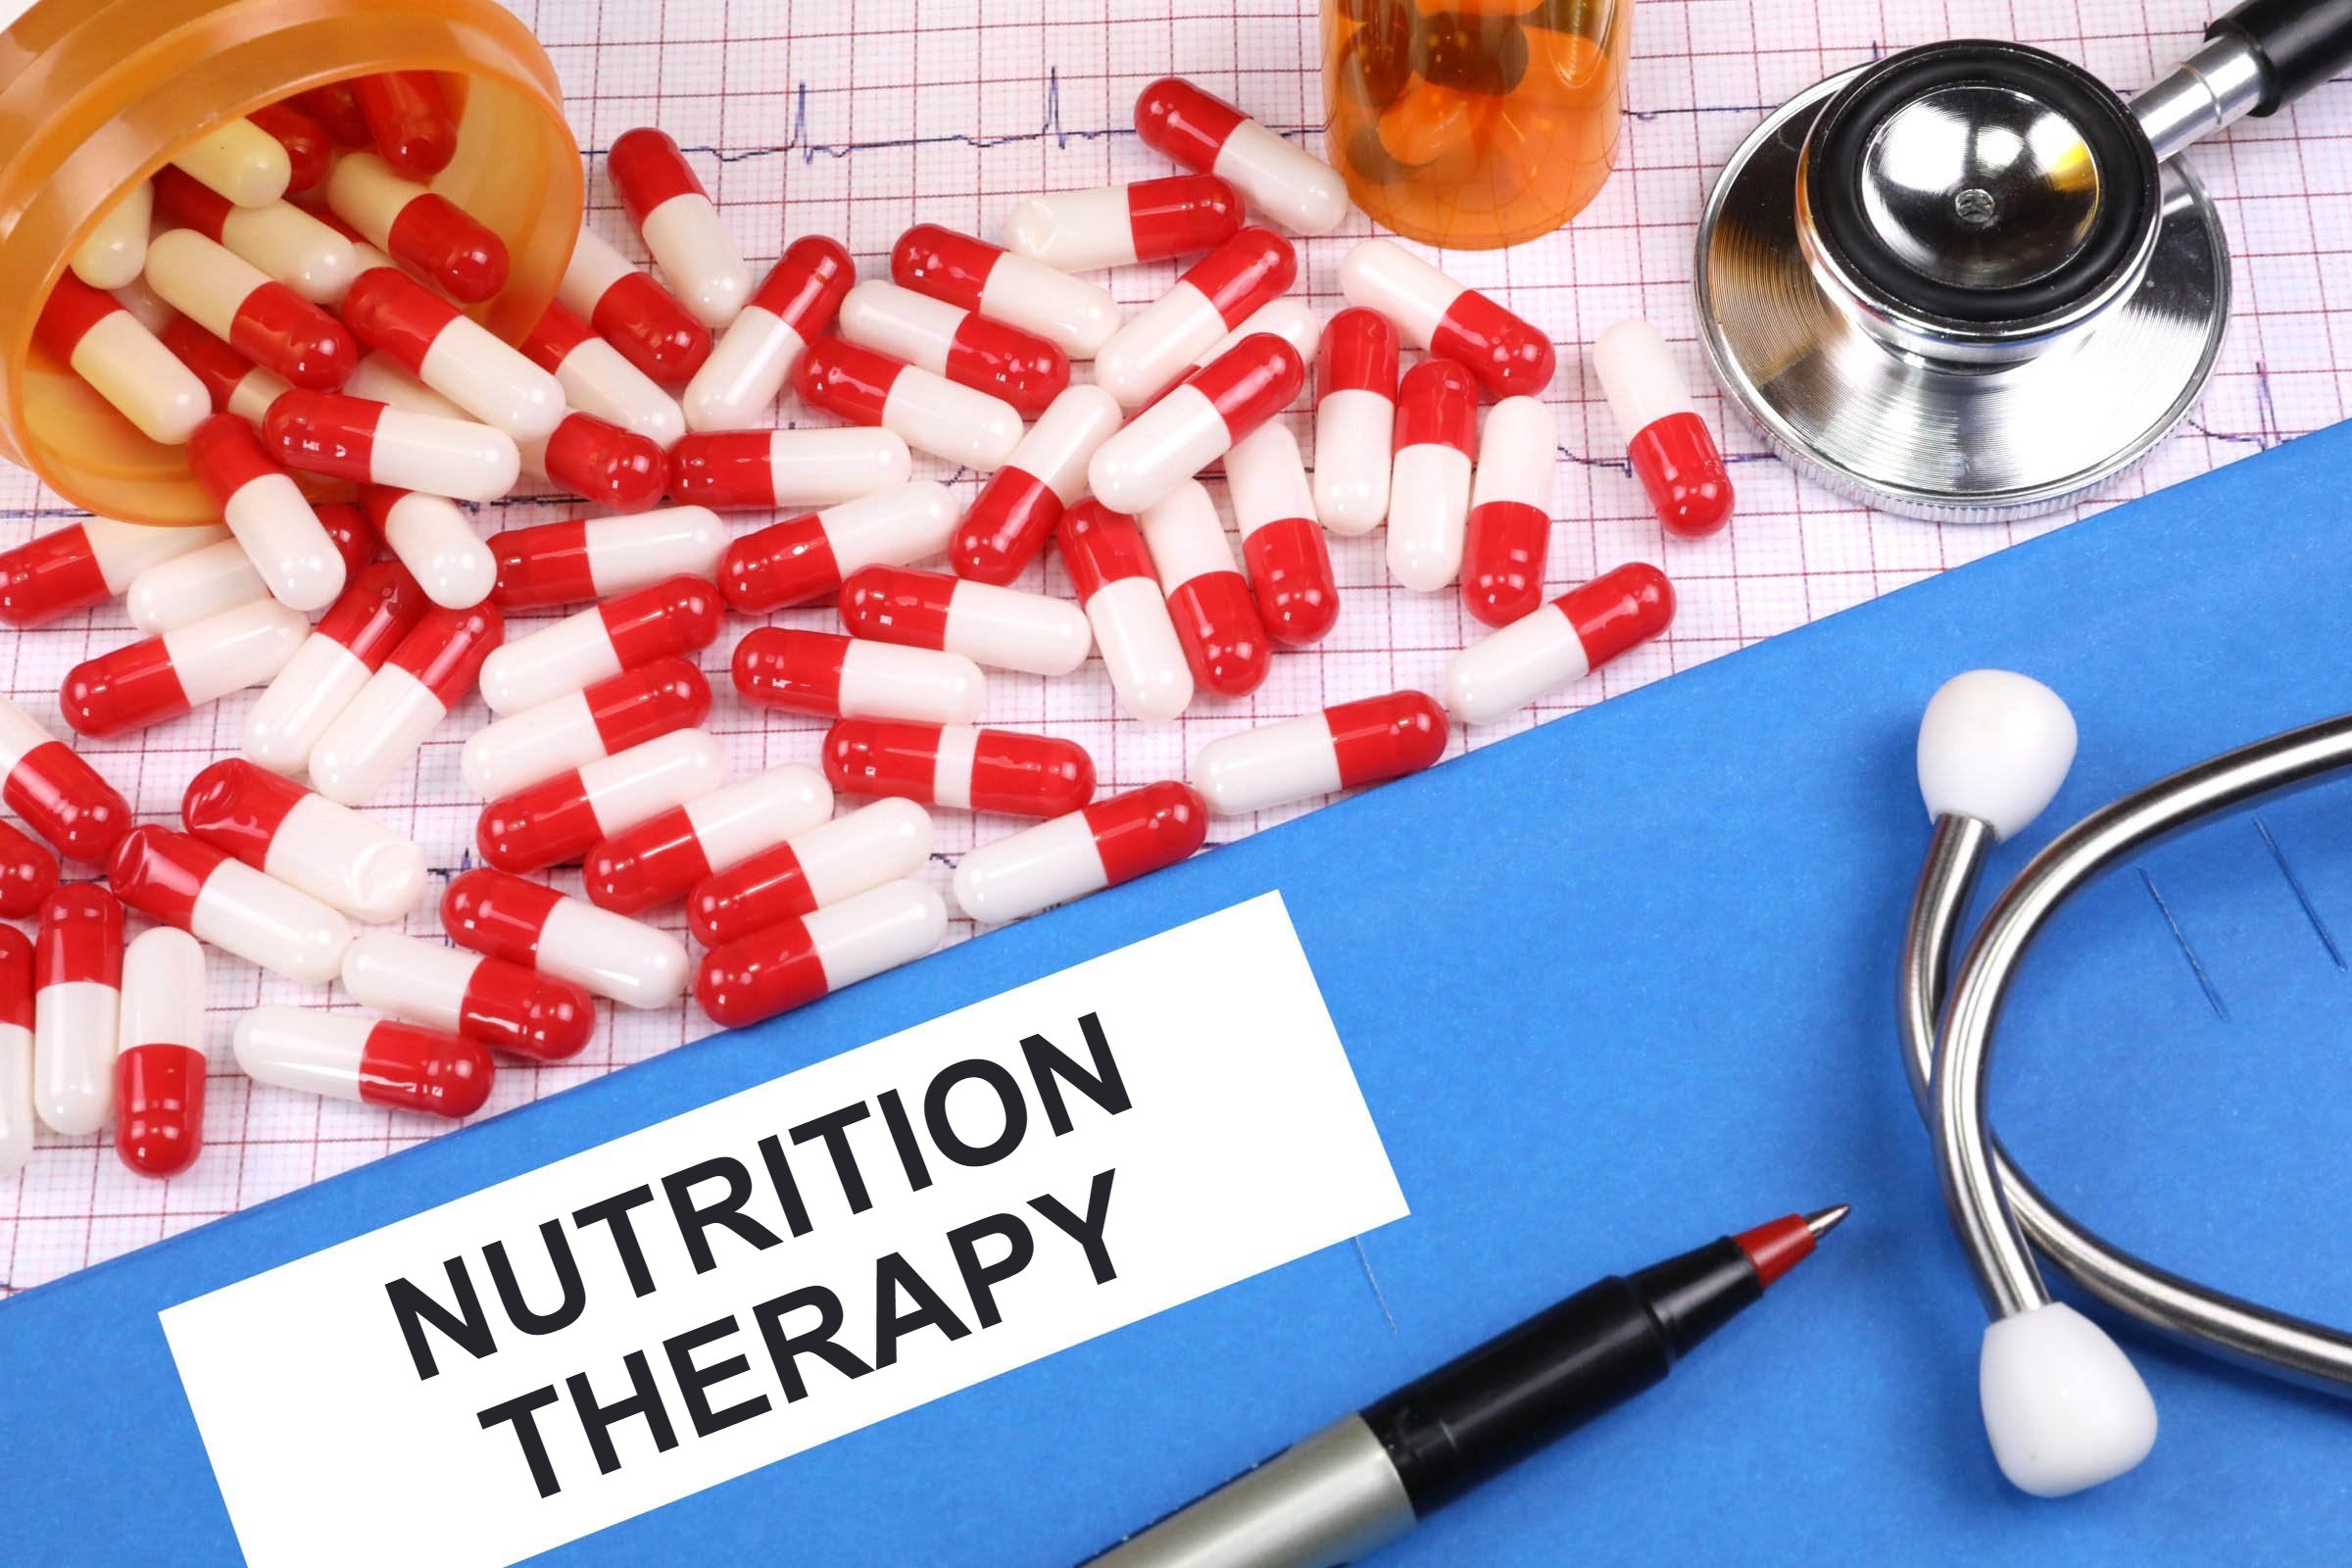 nutrition therapy